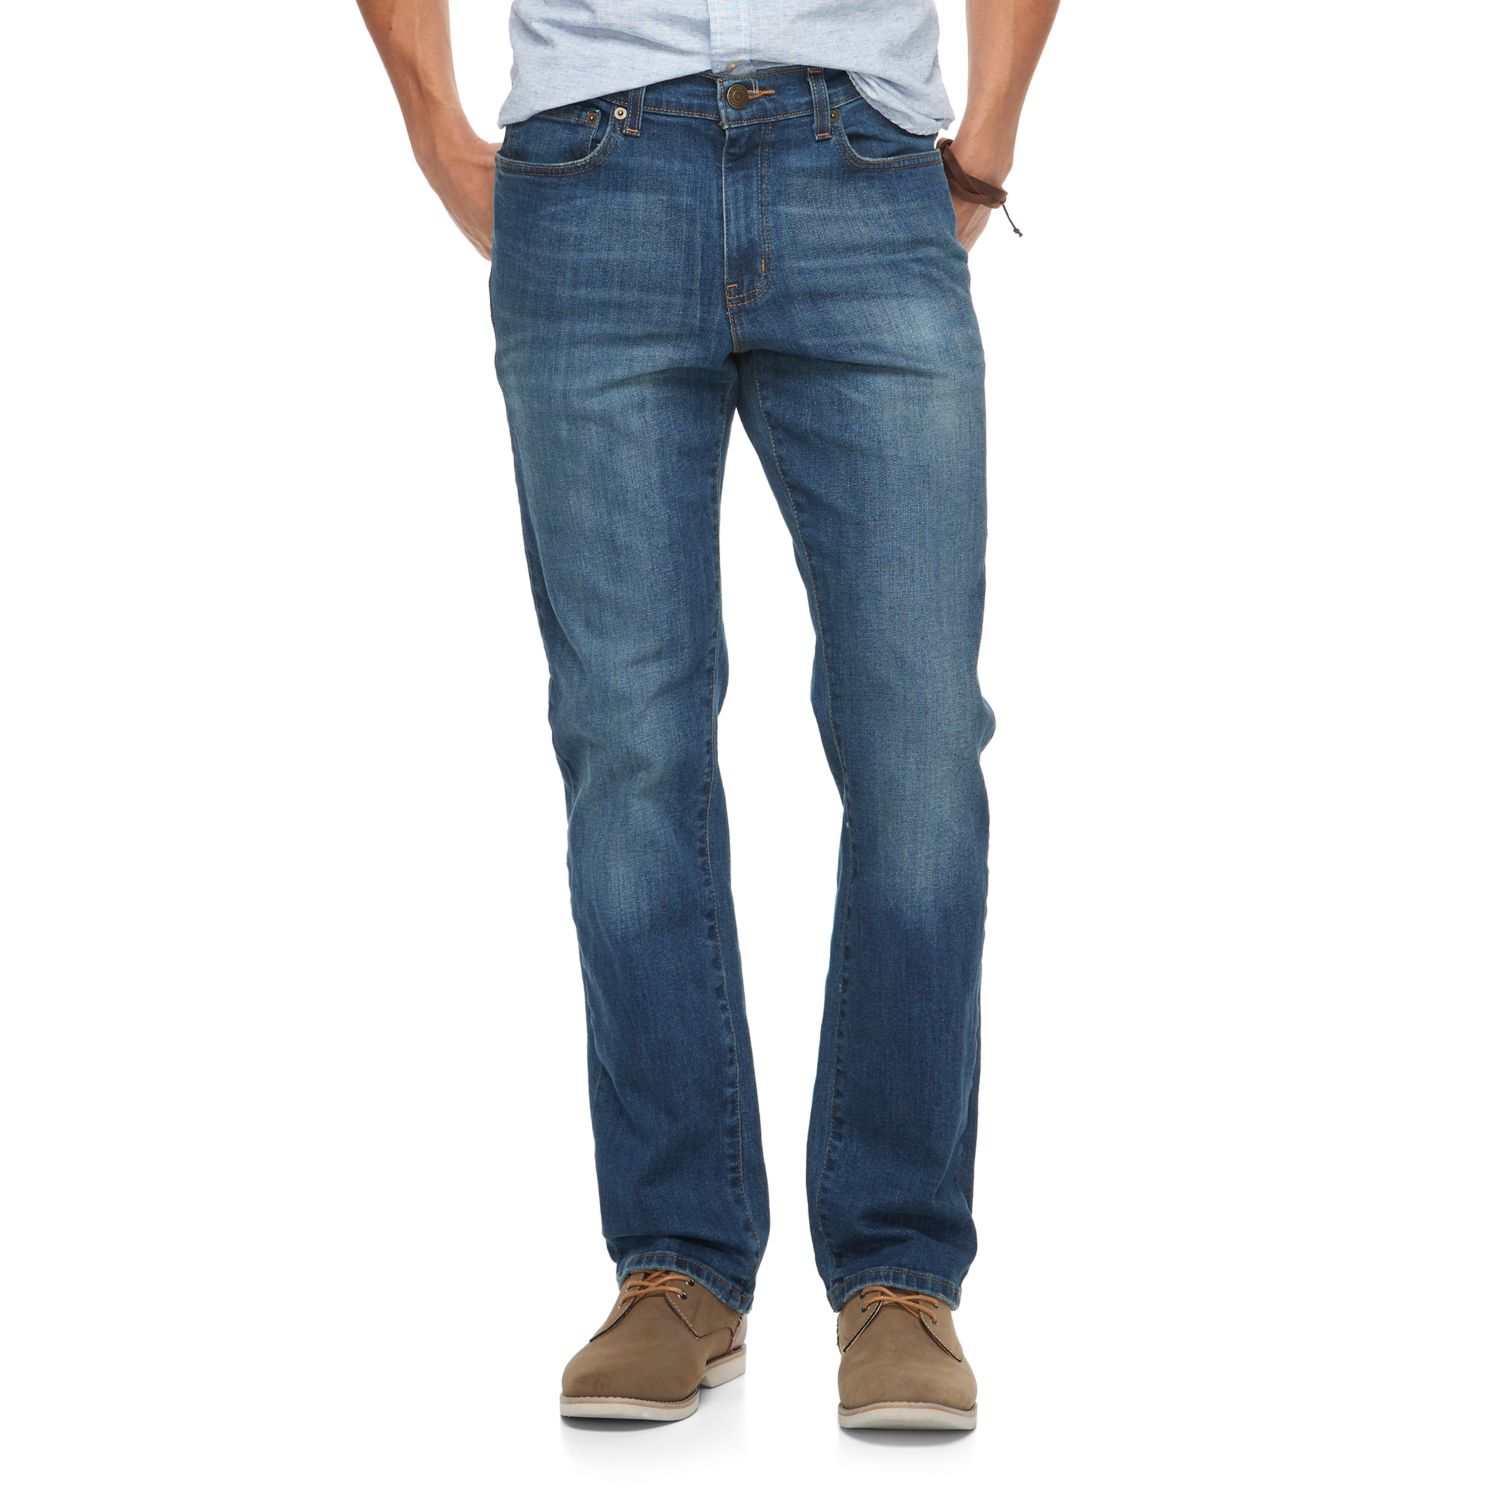 sonoma men's relaxed fit jeans